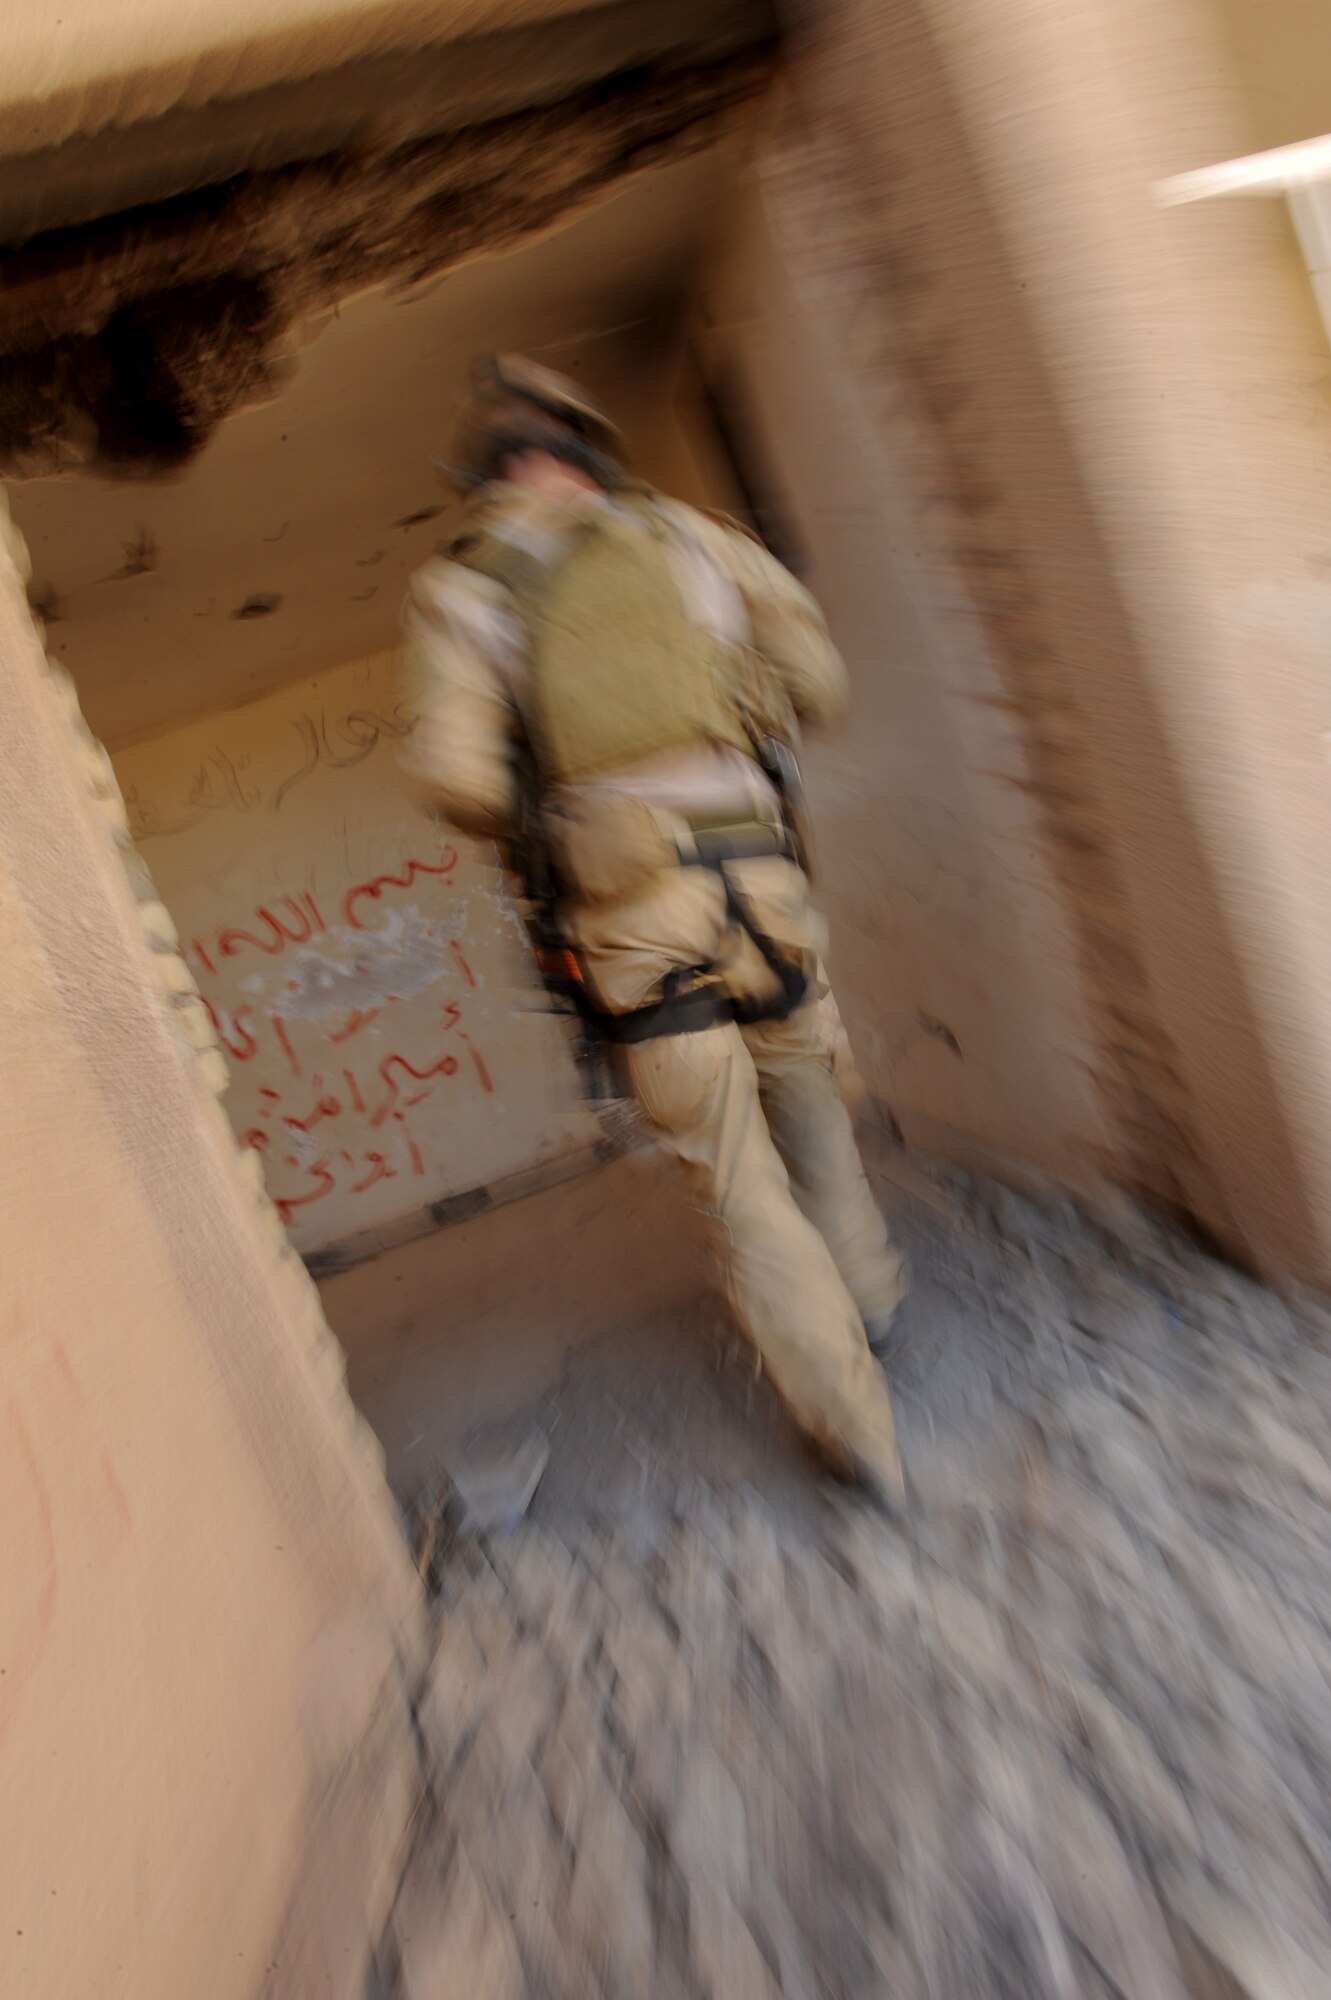 U.S. Air Force Combat Rescue Officer Capt. Robert Wilson, assigned to the 64th Expeditionary Rescue Squadron, Joint Base Balad, Iraq, enters a building during a proficiency exercise April 10, 2009, in support of Operation Iraqi Freedom.  (U.S. Air Force photo by Staff Sgt. James L. Harper Jr.)